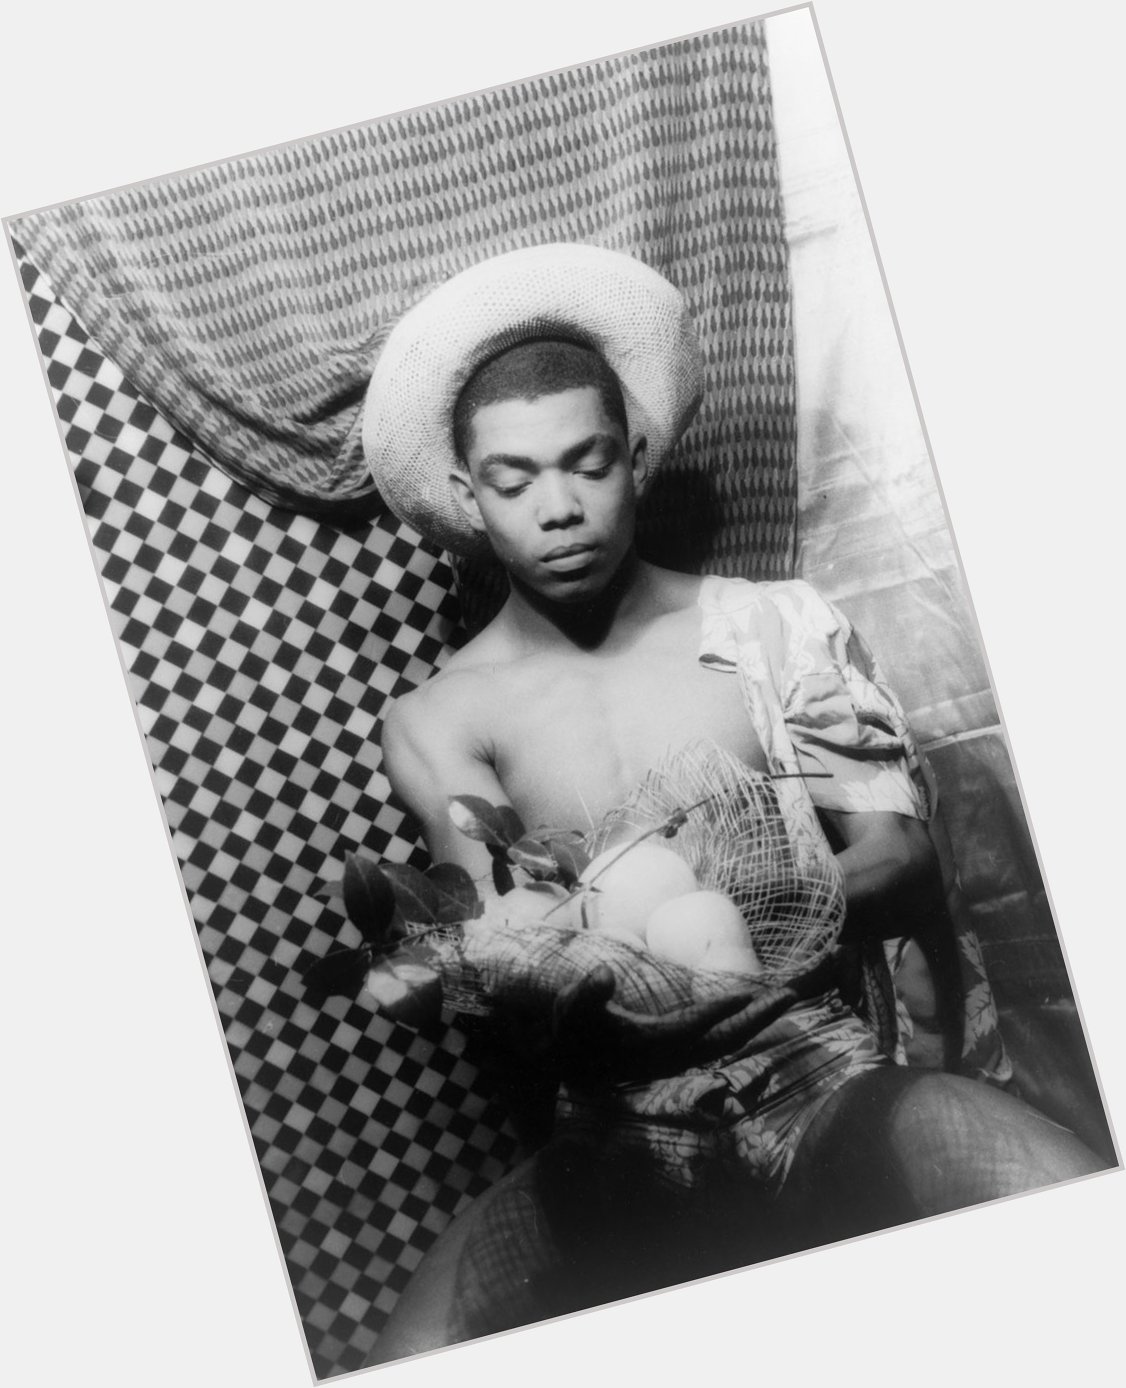 Happy Birthday to Alvin Ailey, who would have turned 87 today! 